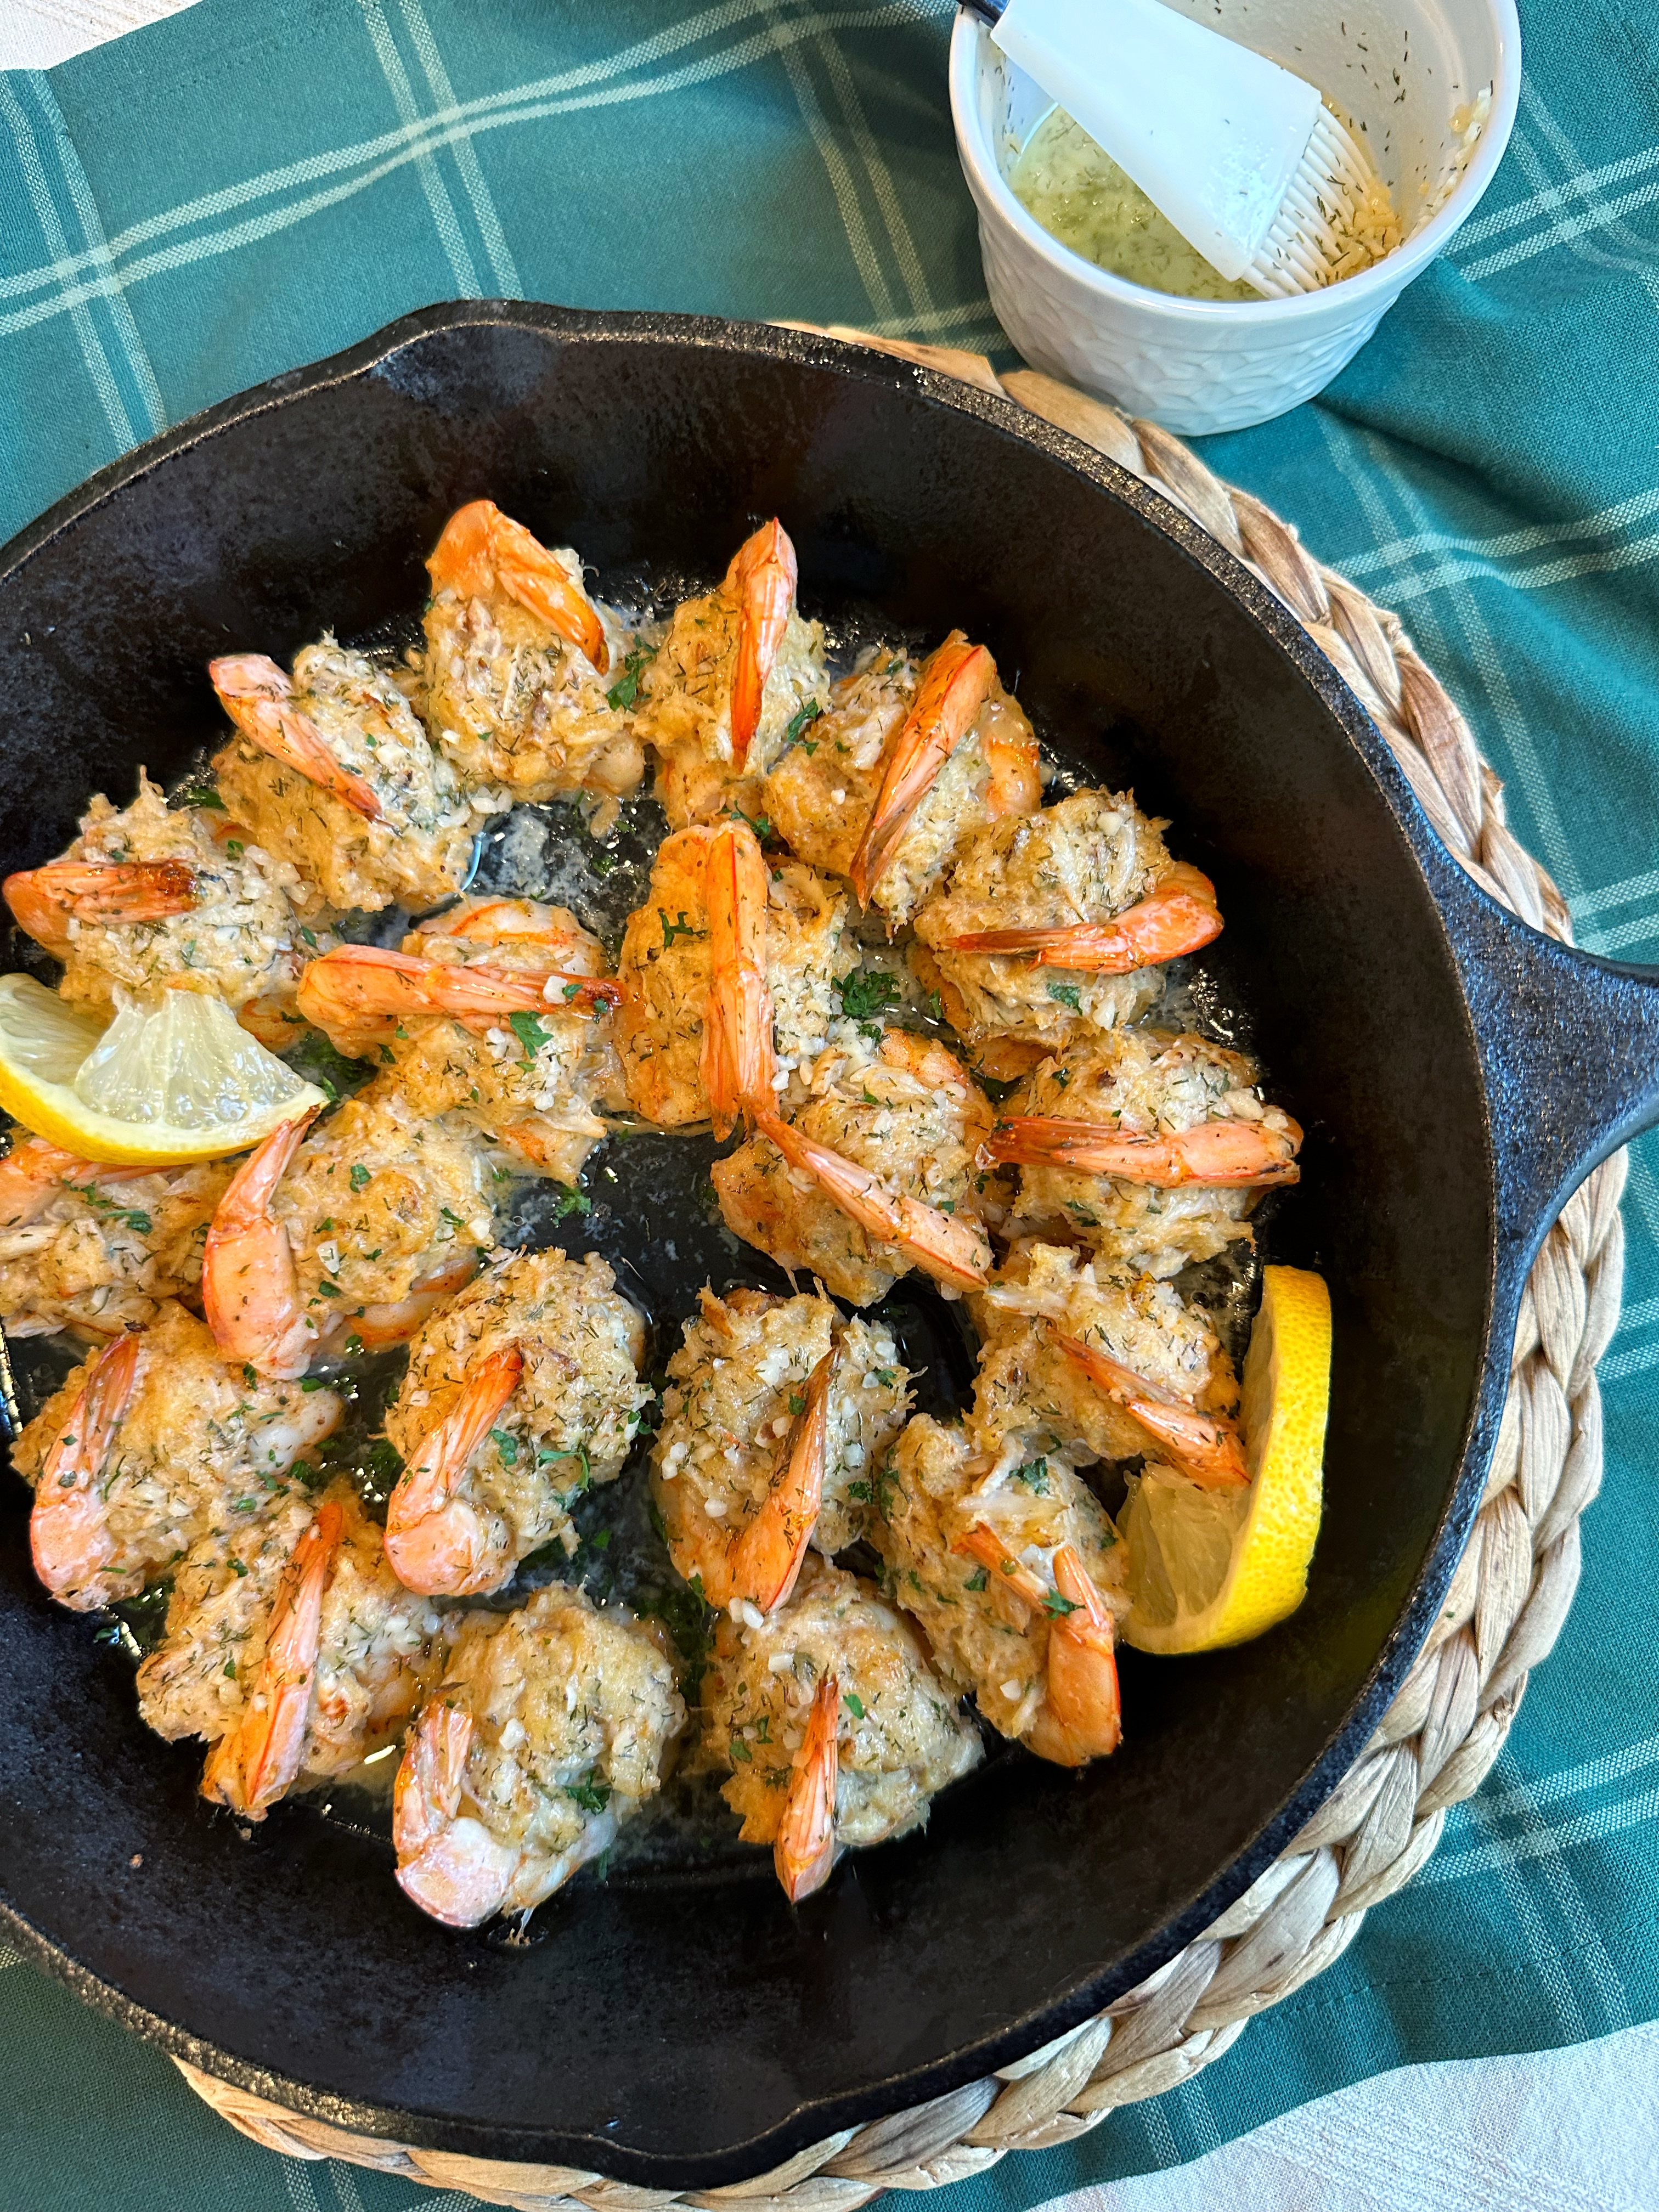 A cast-iron skillet filled with Crab Stuffed Shrimp, lemon slices, and fresh parsley and melted butter on the side.